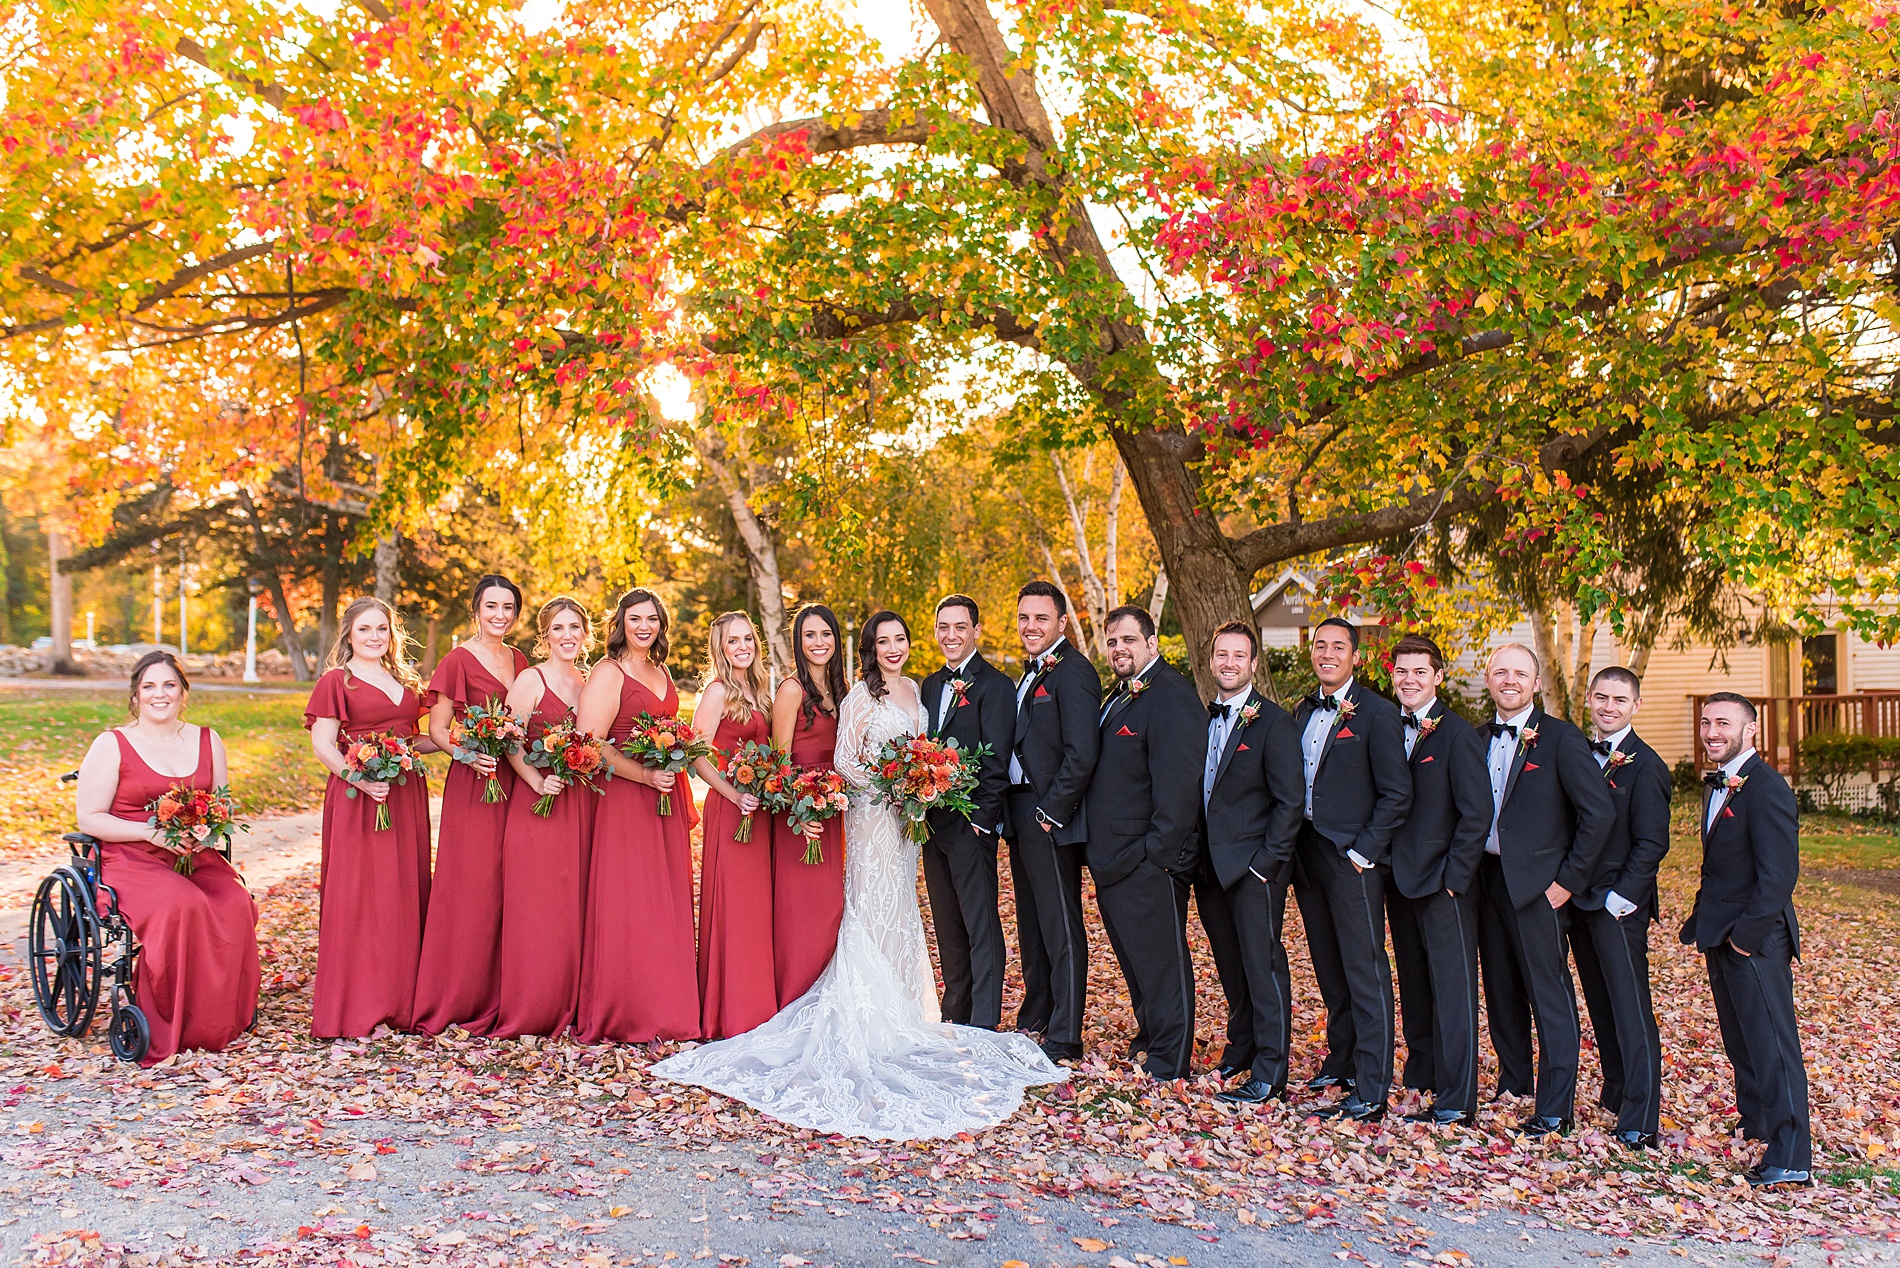 Ma bridal party under a canopy of trees